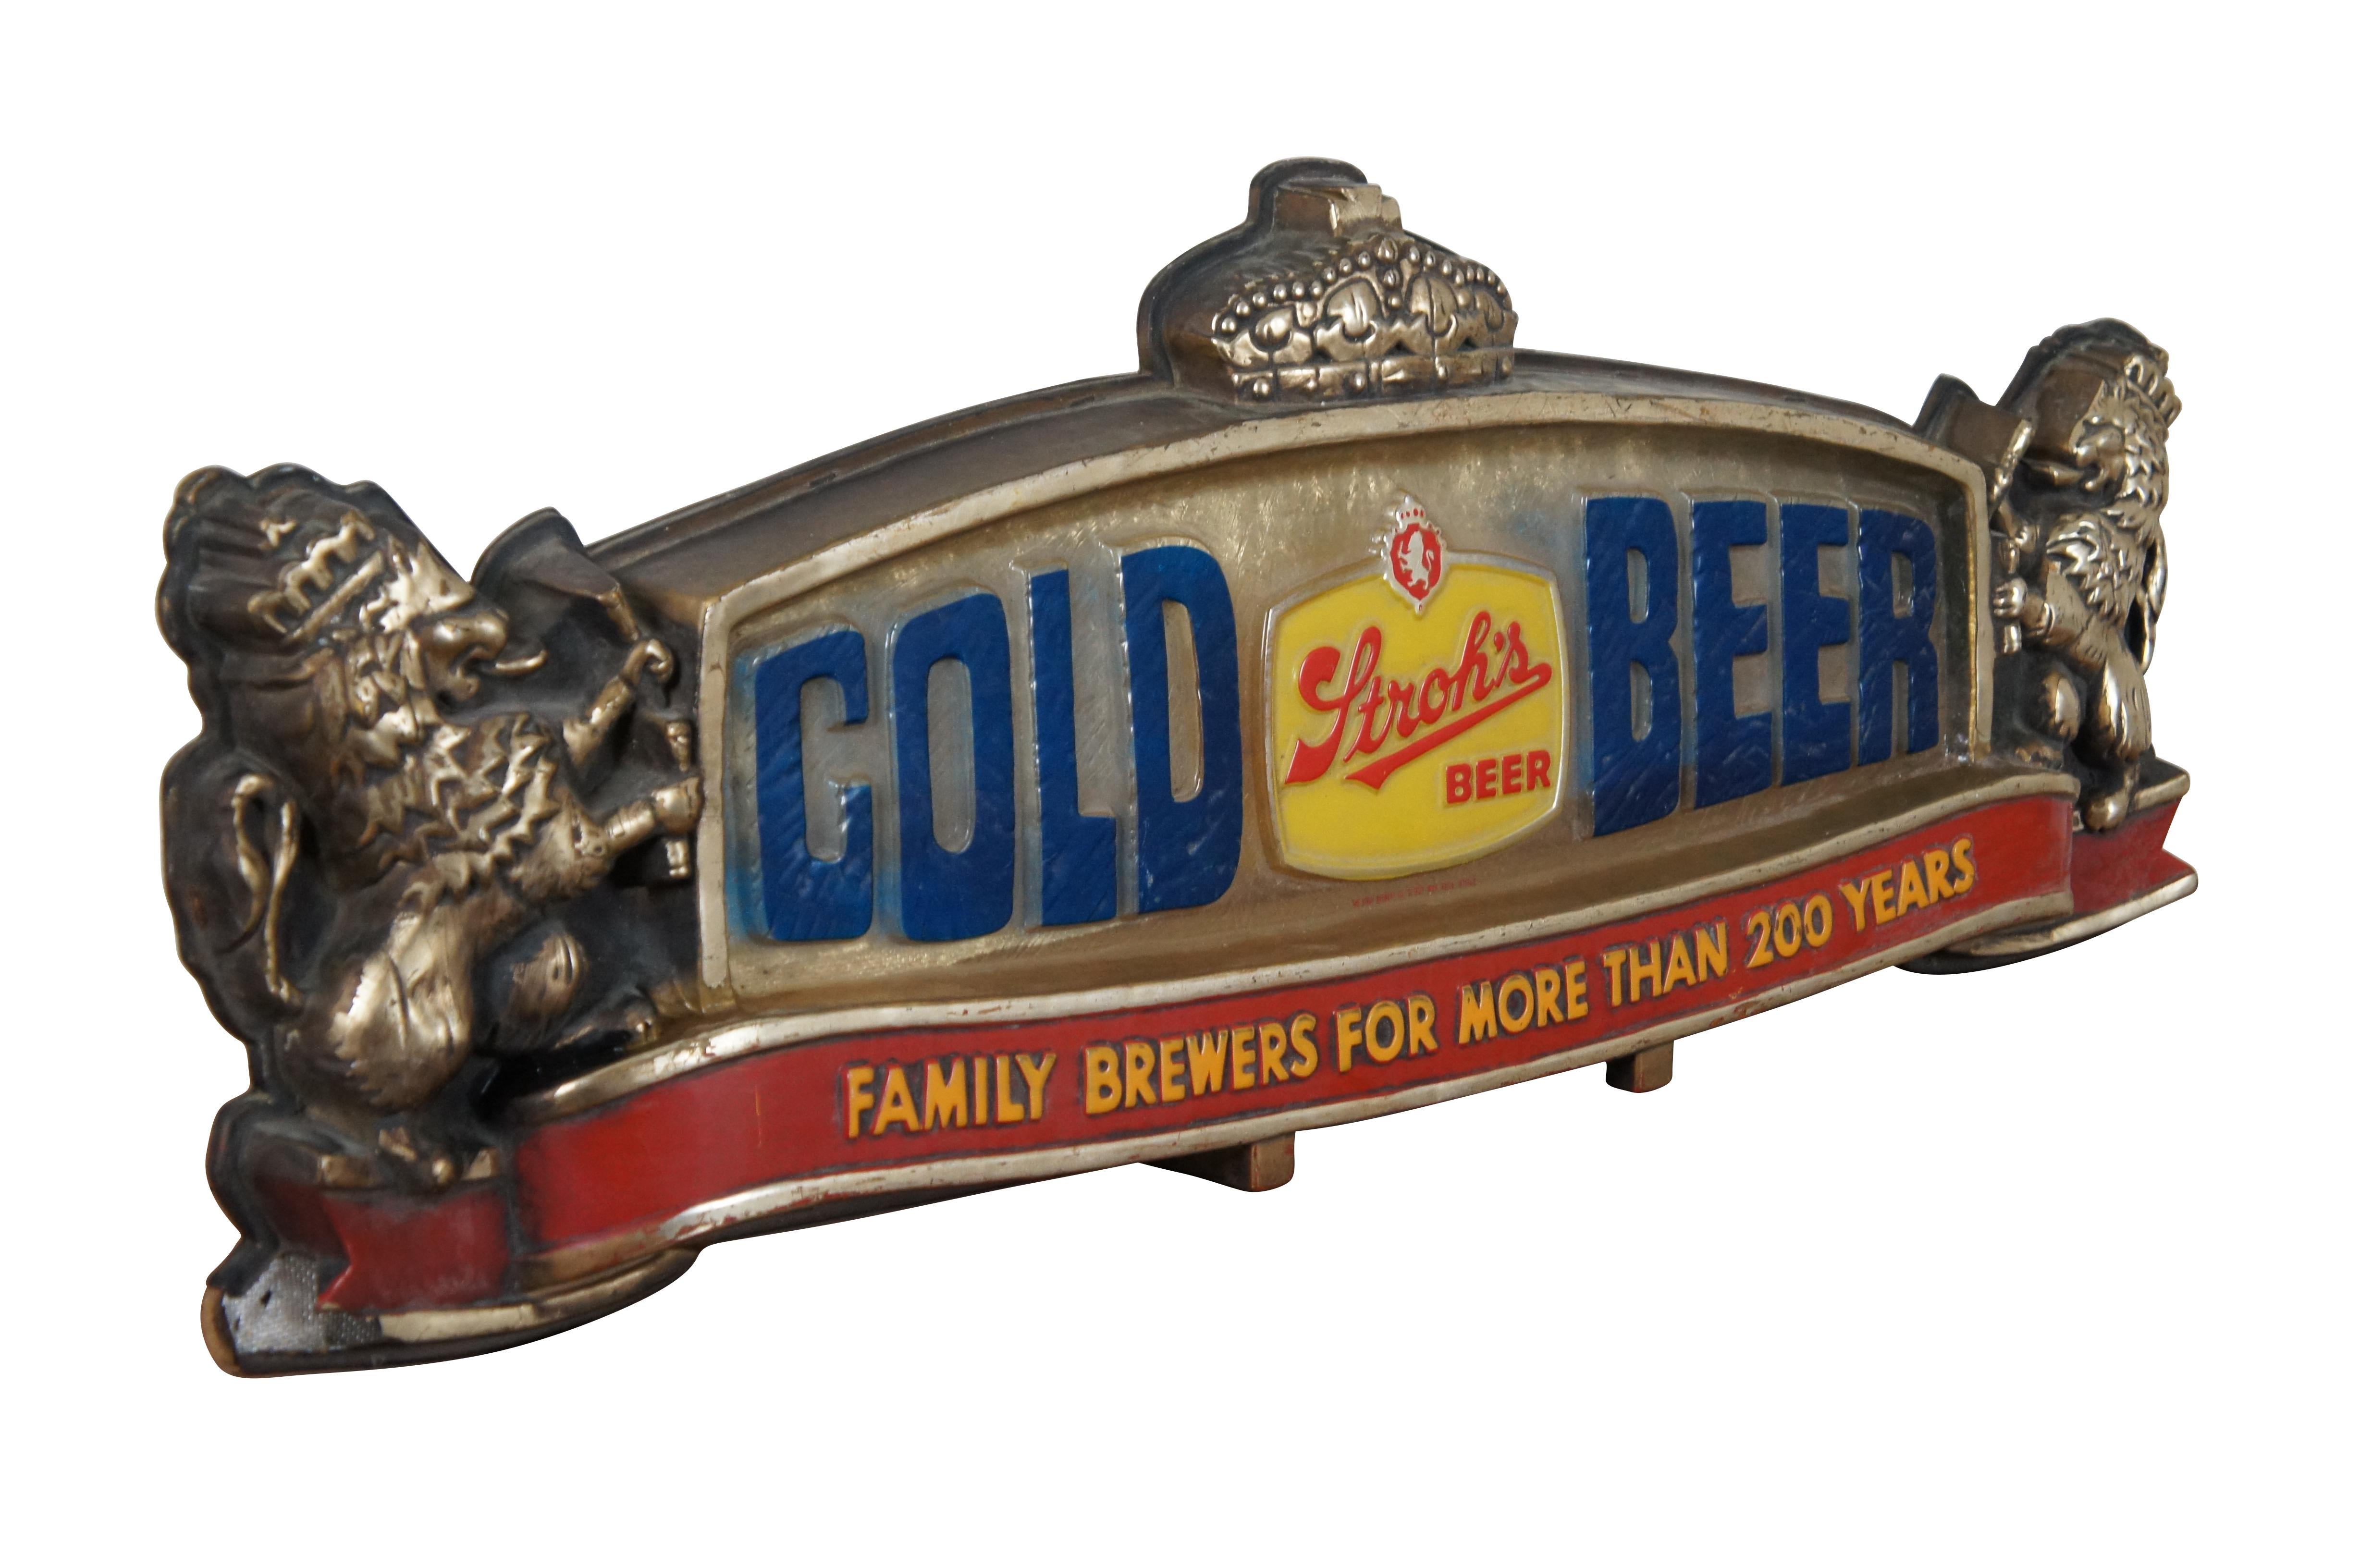 Vintage three dimensional plastic Stroh’s beer sign featuring the Stroh’s logo in yellow and red, flanked by the words “Cold Beer” in blue on a pebble surface, surrounded by a golden frame with a crown at the center of the top edge and held by a